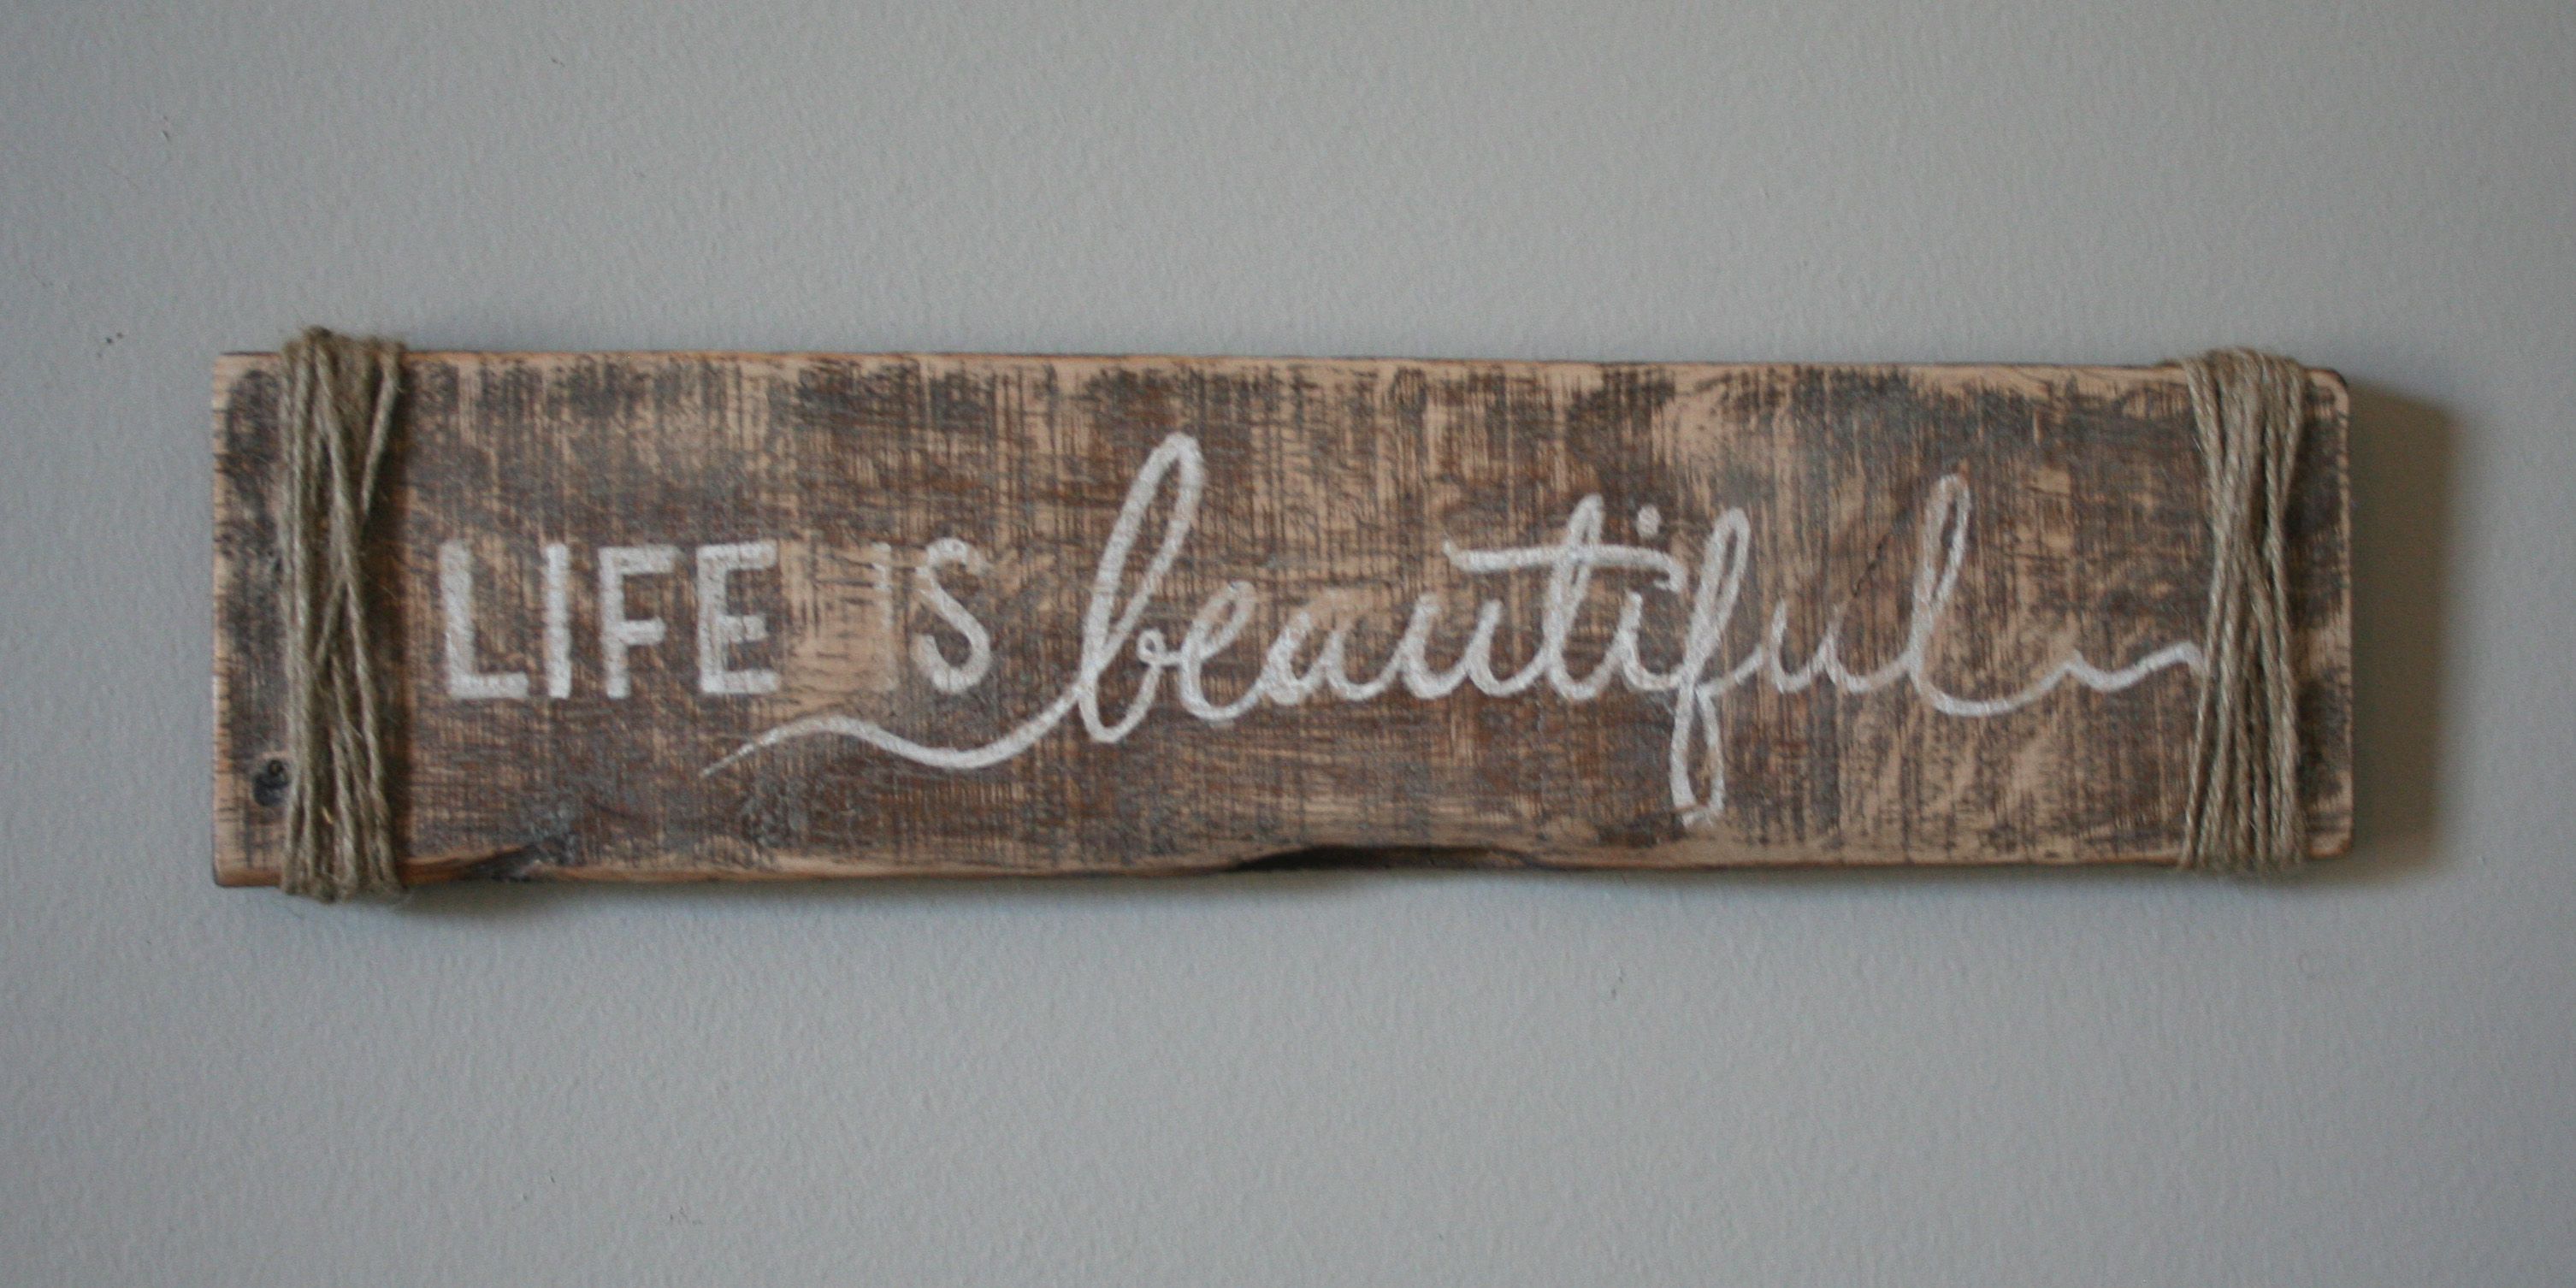 Life Is Beautiful Hand Painted Pallet Sign from Shanty Town Home Decor - Life Is Beautiful Hand Painted Pallet Sign from Shanty Town Home Decor -   16 beauty Life sign ideas